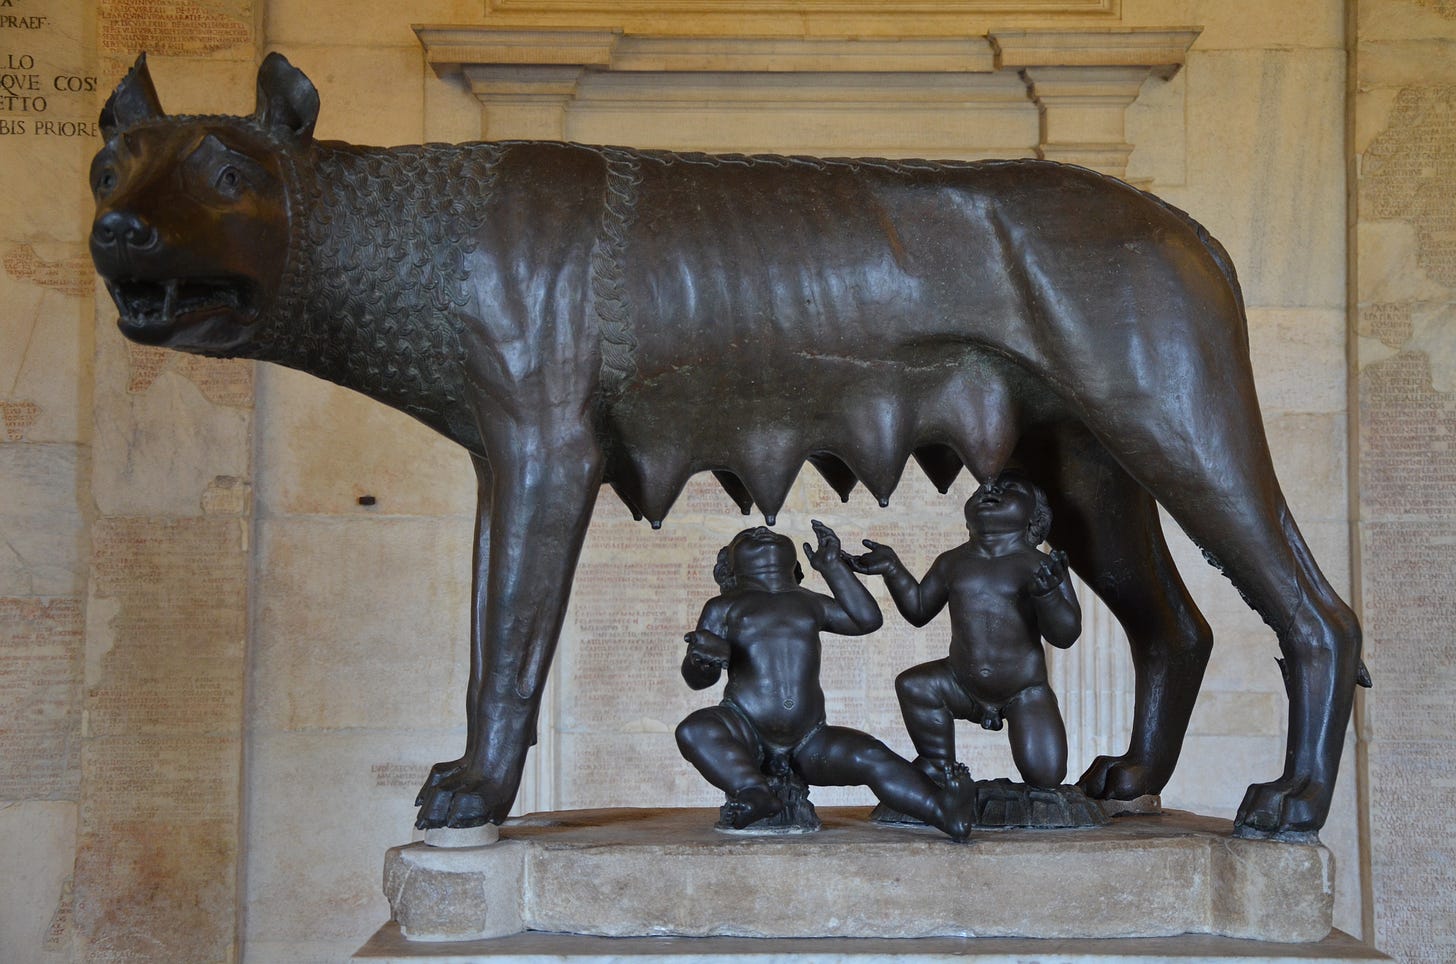 The Capitoline Wolf, a bronze wolf with mouth agape, looking off into the distance with its mouth open, while Romulus and Remus (two cherubic toddlers) stand below the wolf's breasts, awaiting milk